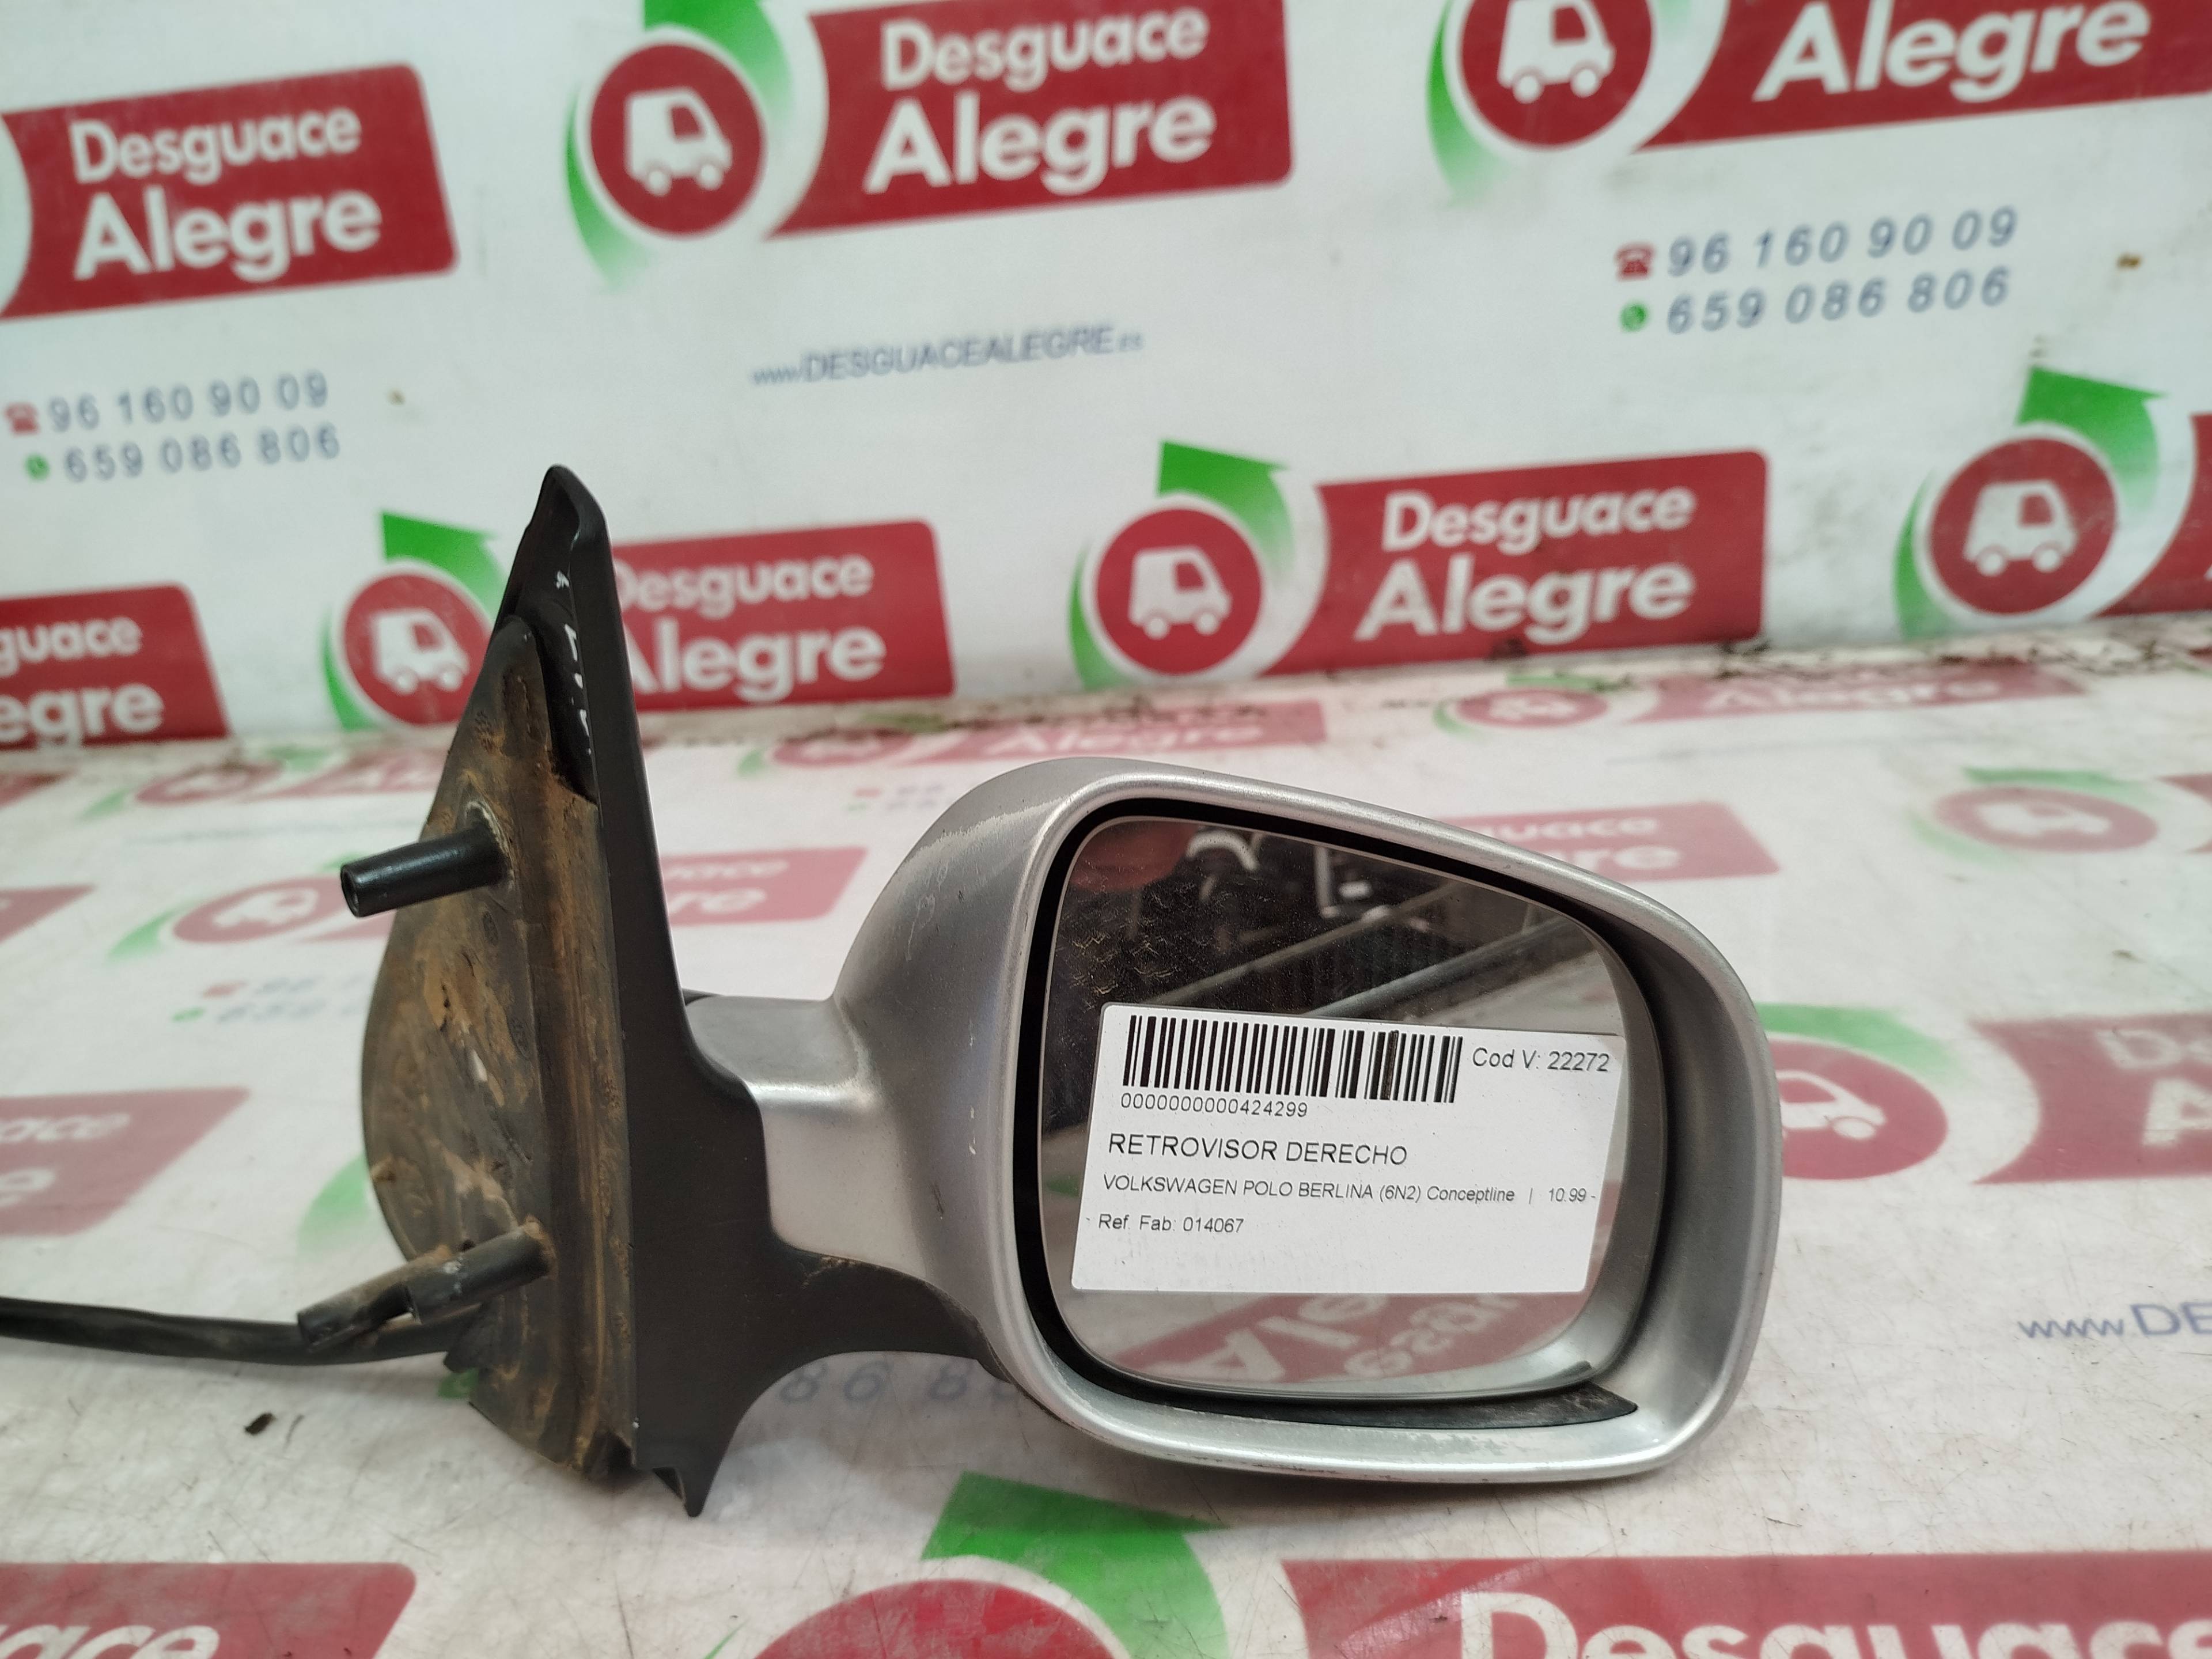 VOLKSWAGEN Polo 3 generation (1994-2002) Right Side Wing Mirror 014067 24814169